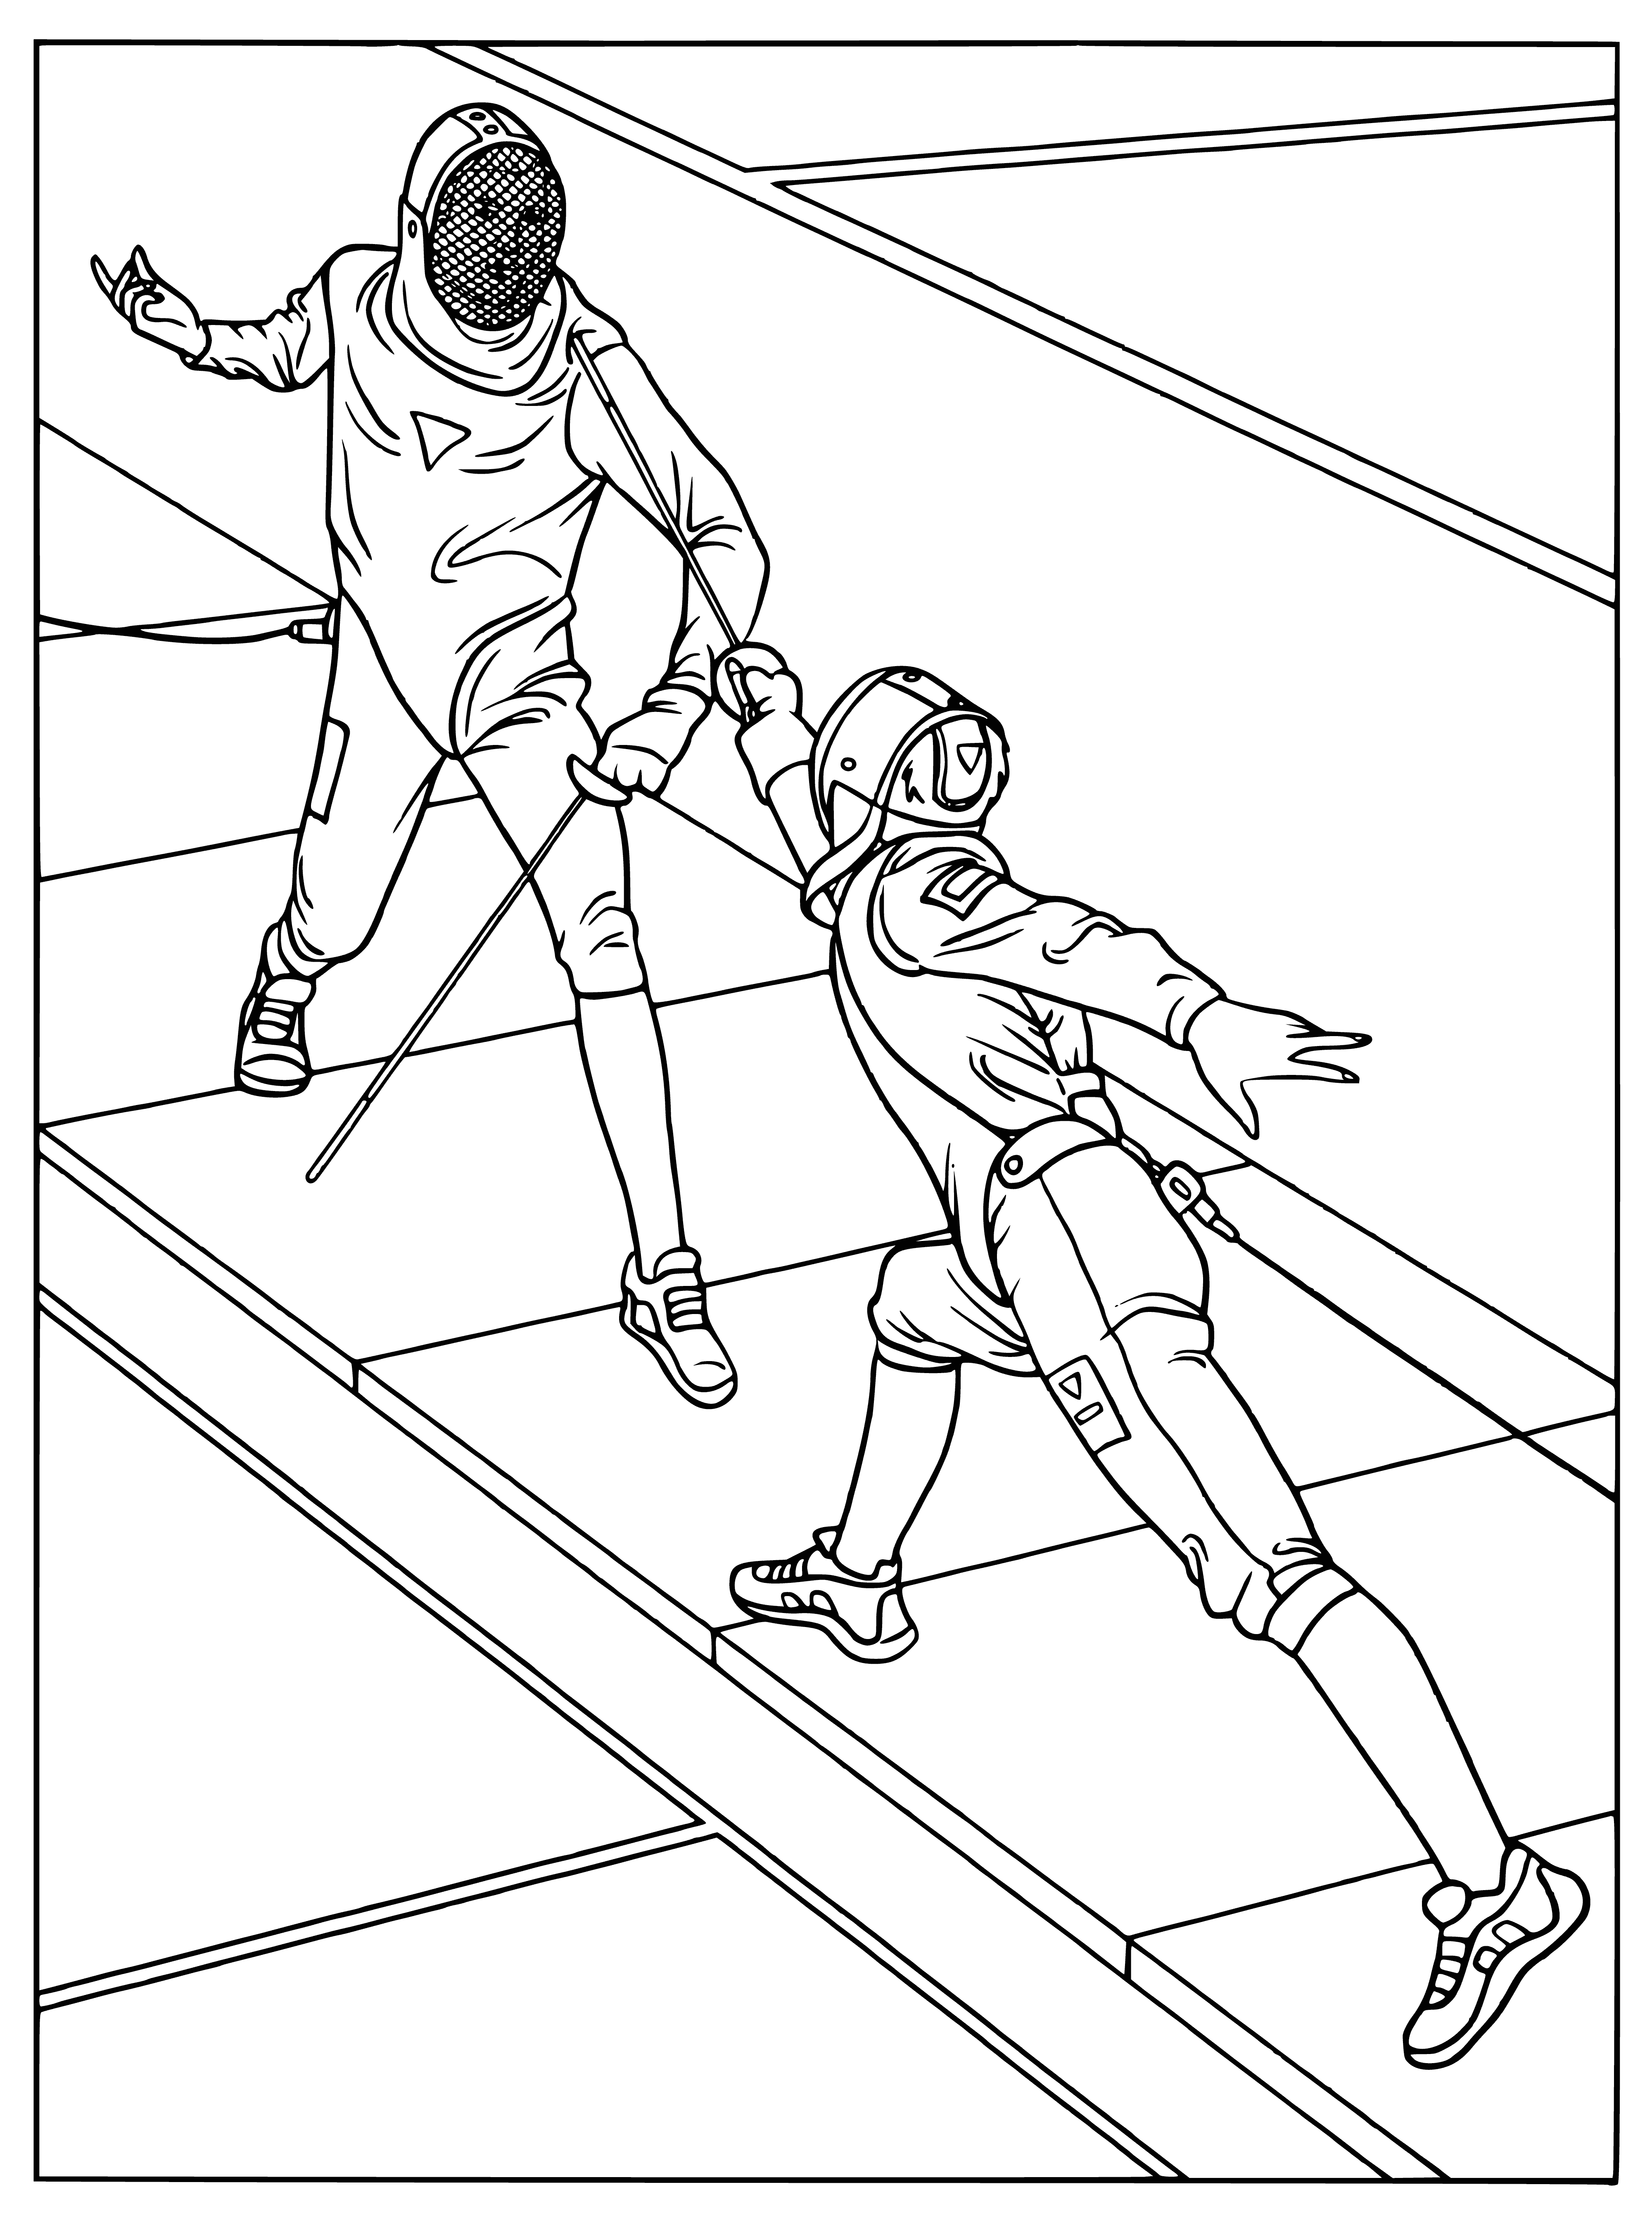 coloring page: 3 people in white uniforms hold swords in epic battle. One sits, 2 stand; one points sword right, other points sword left.